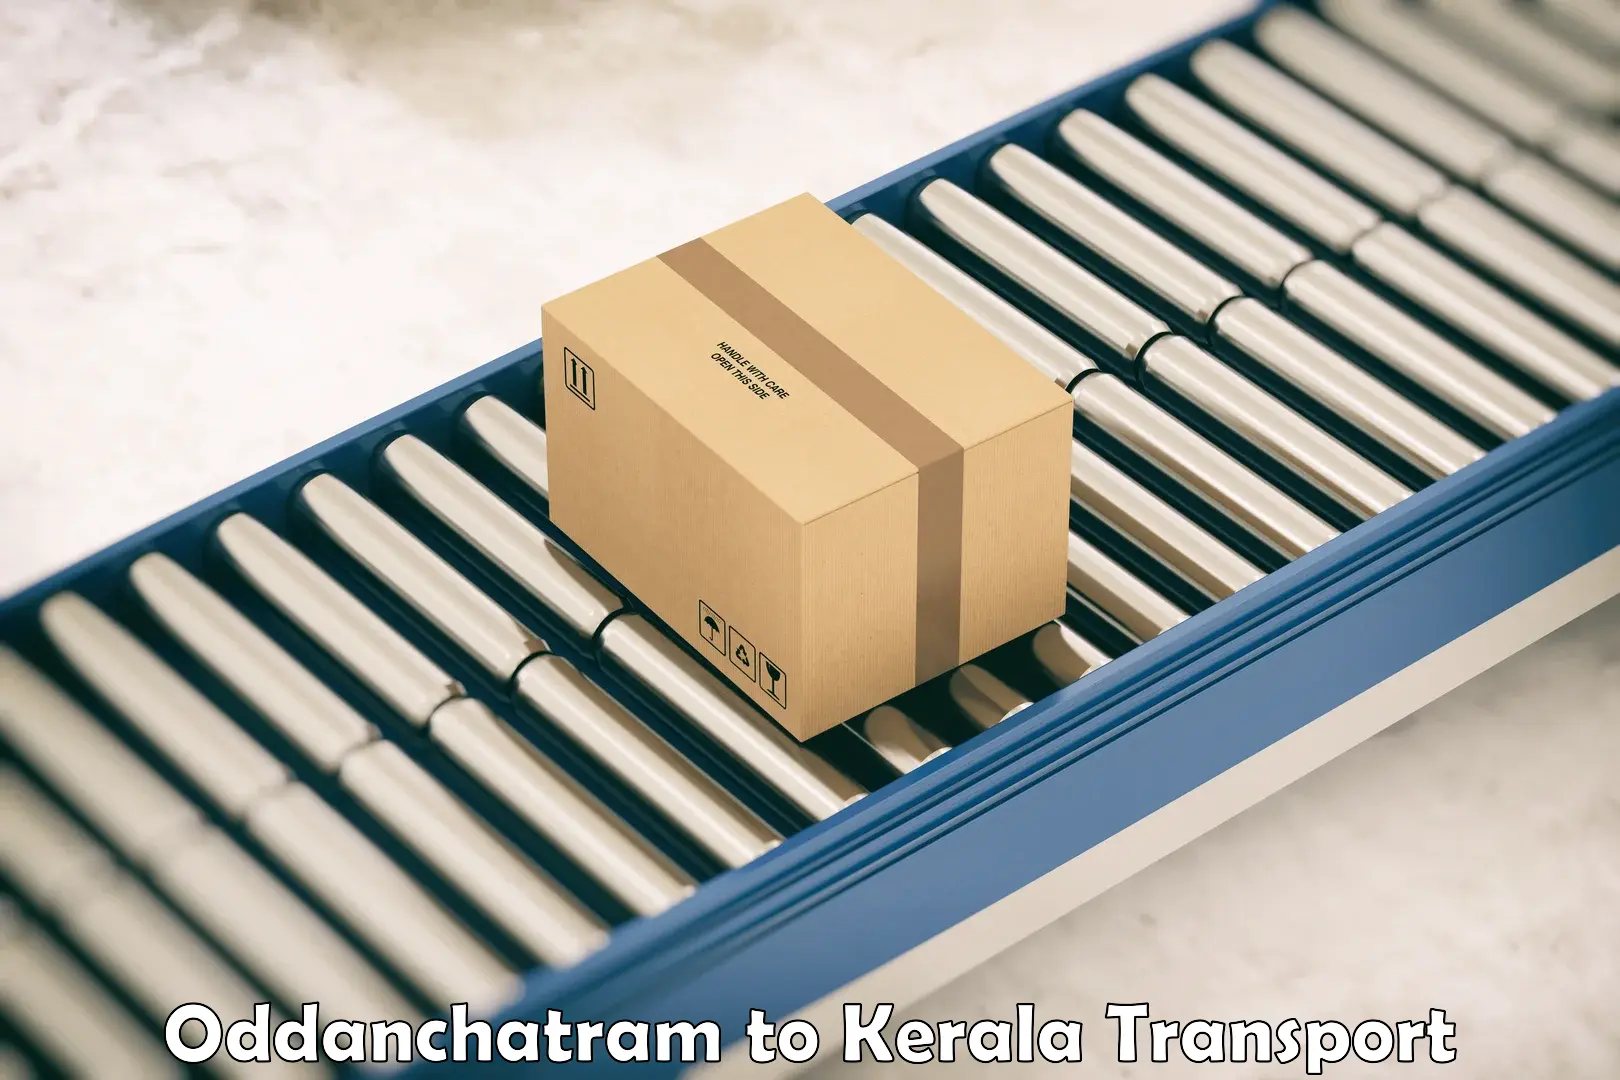 Package delivery services Oddanchatram to Chalakudy